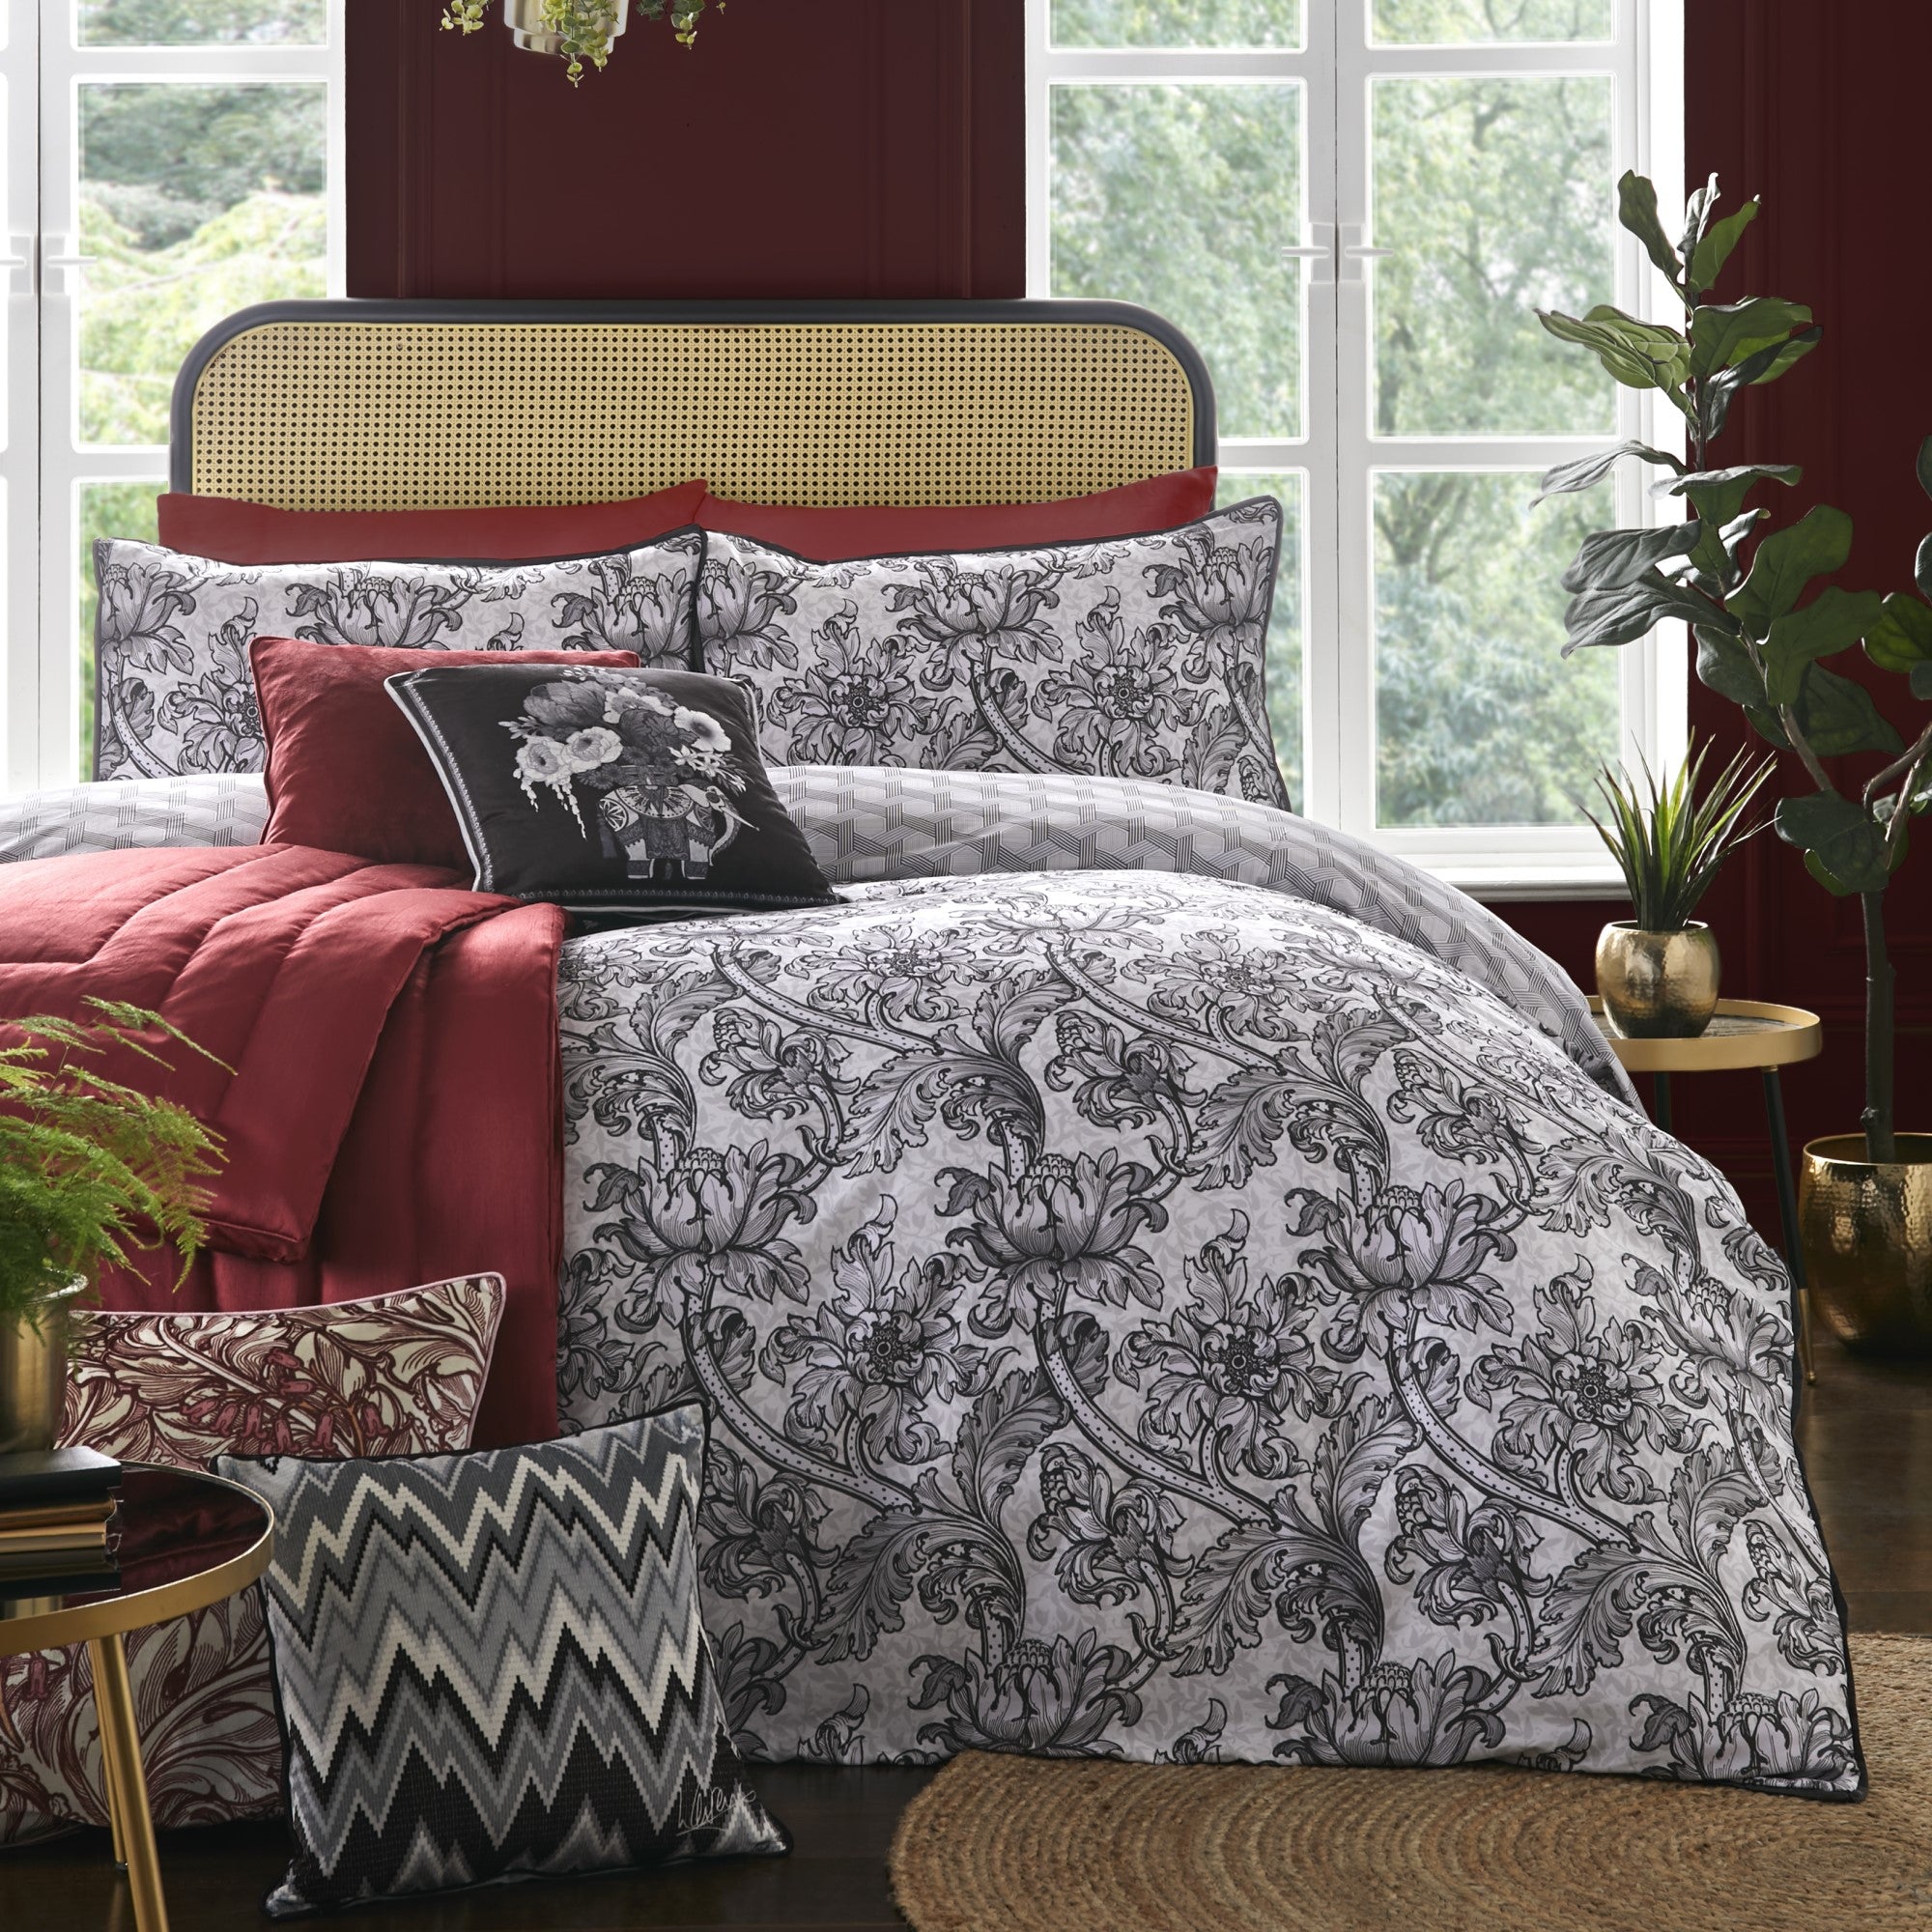 Heart of The Home Duvet Cover Set by Laurence Llewelyn-Bowen in Black - Duvet Cover Set - Laurence Llewelyn-Bowen